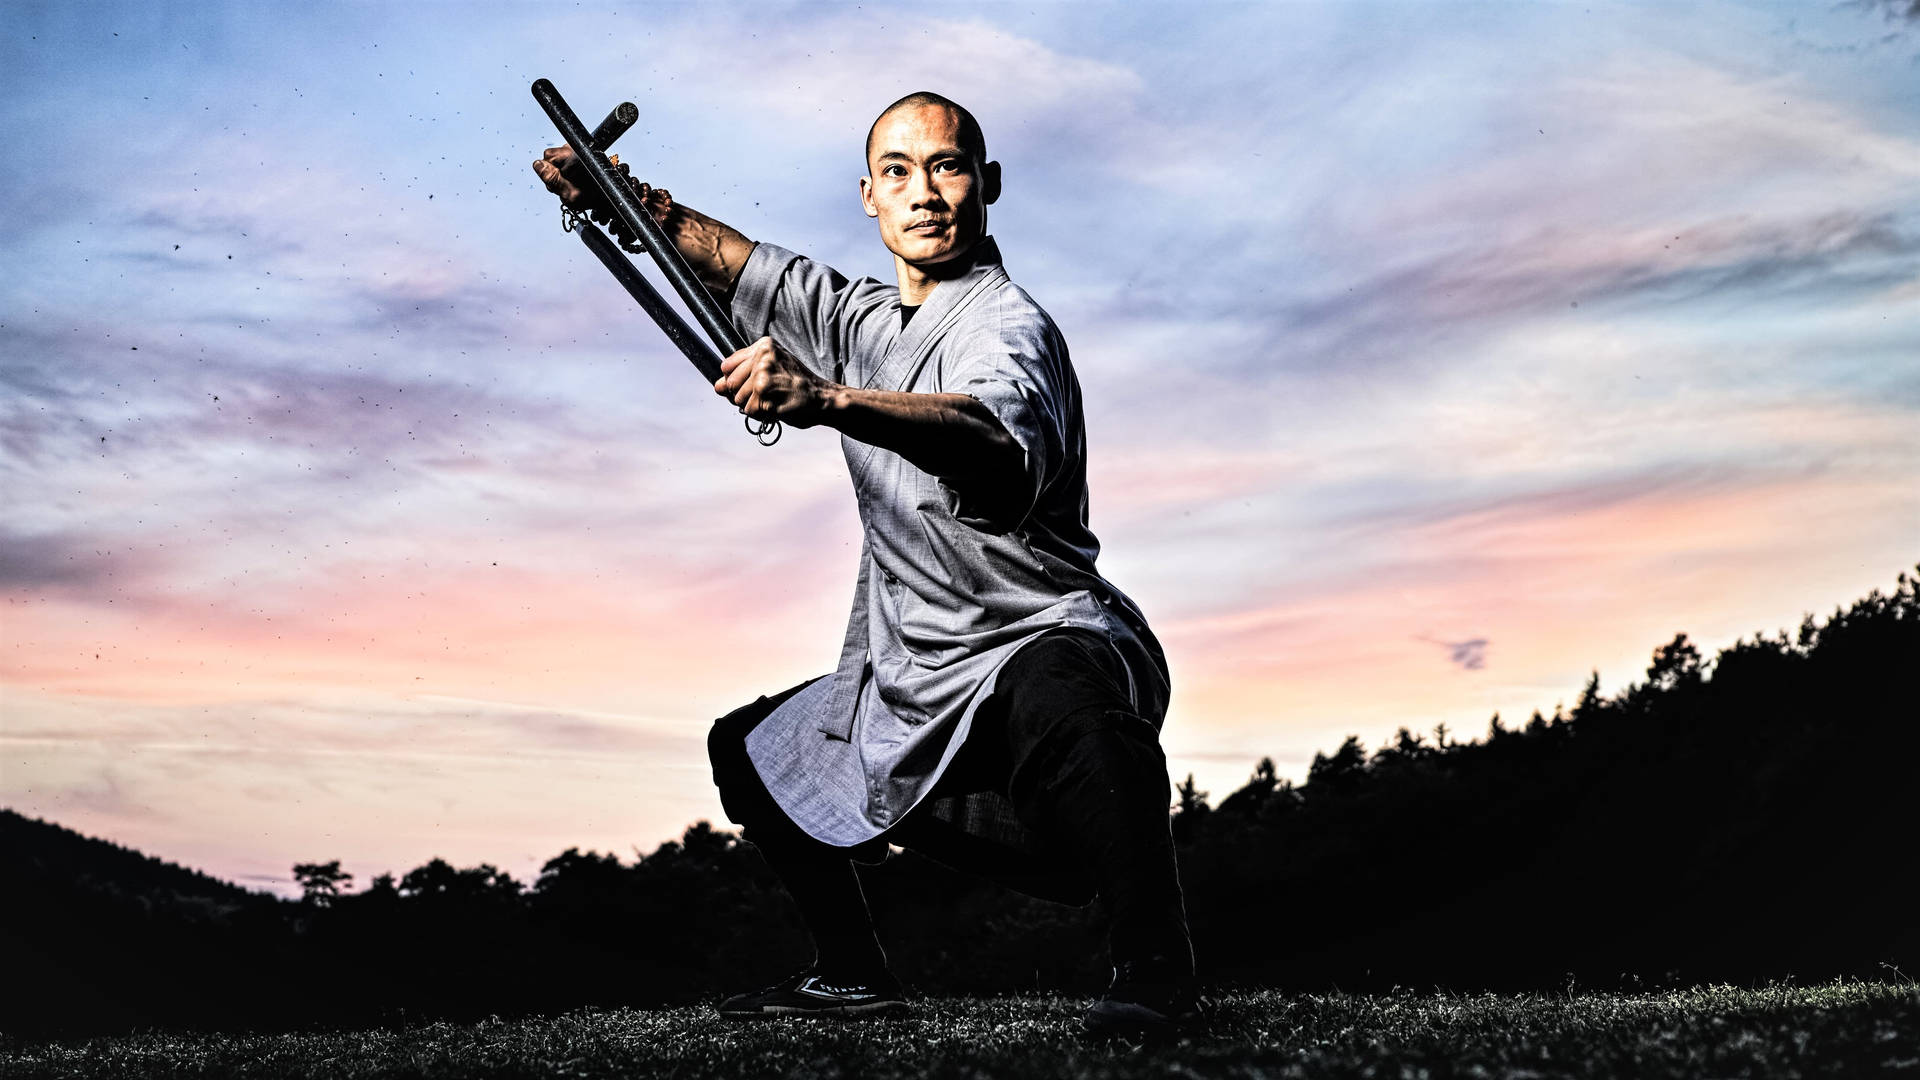 Kung Fu Pictures Wallpaper